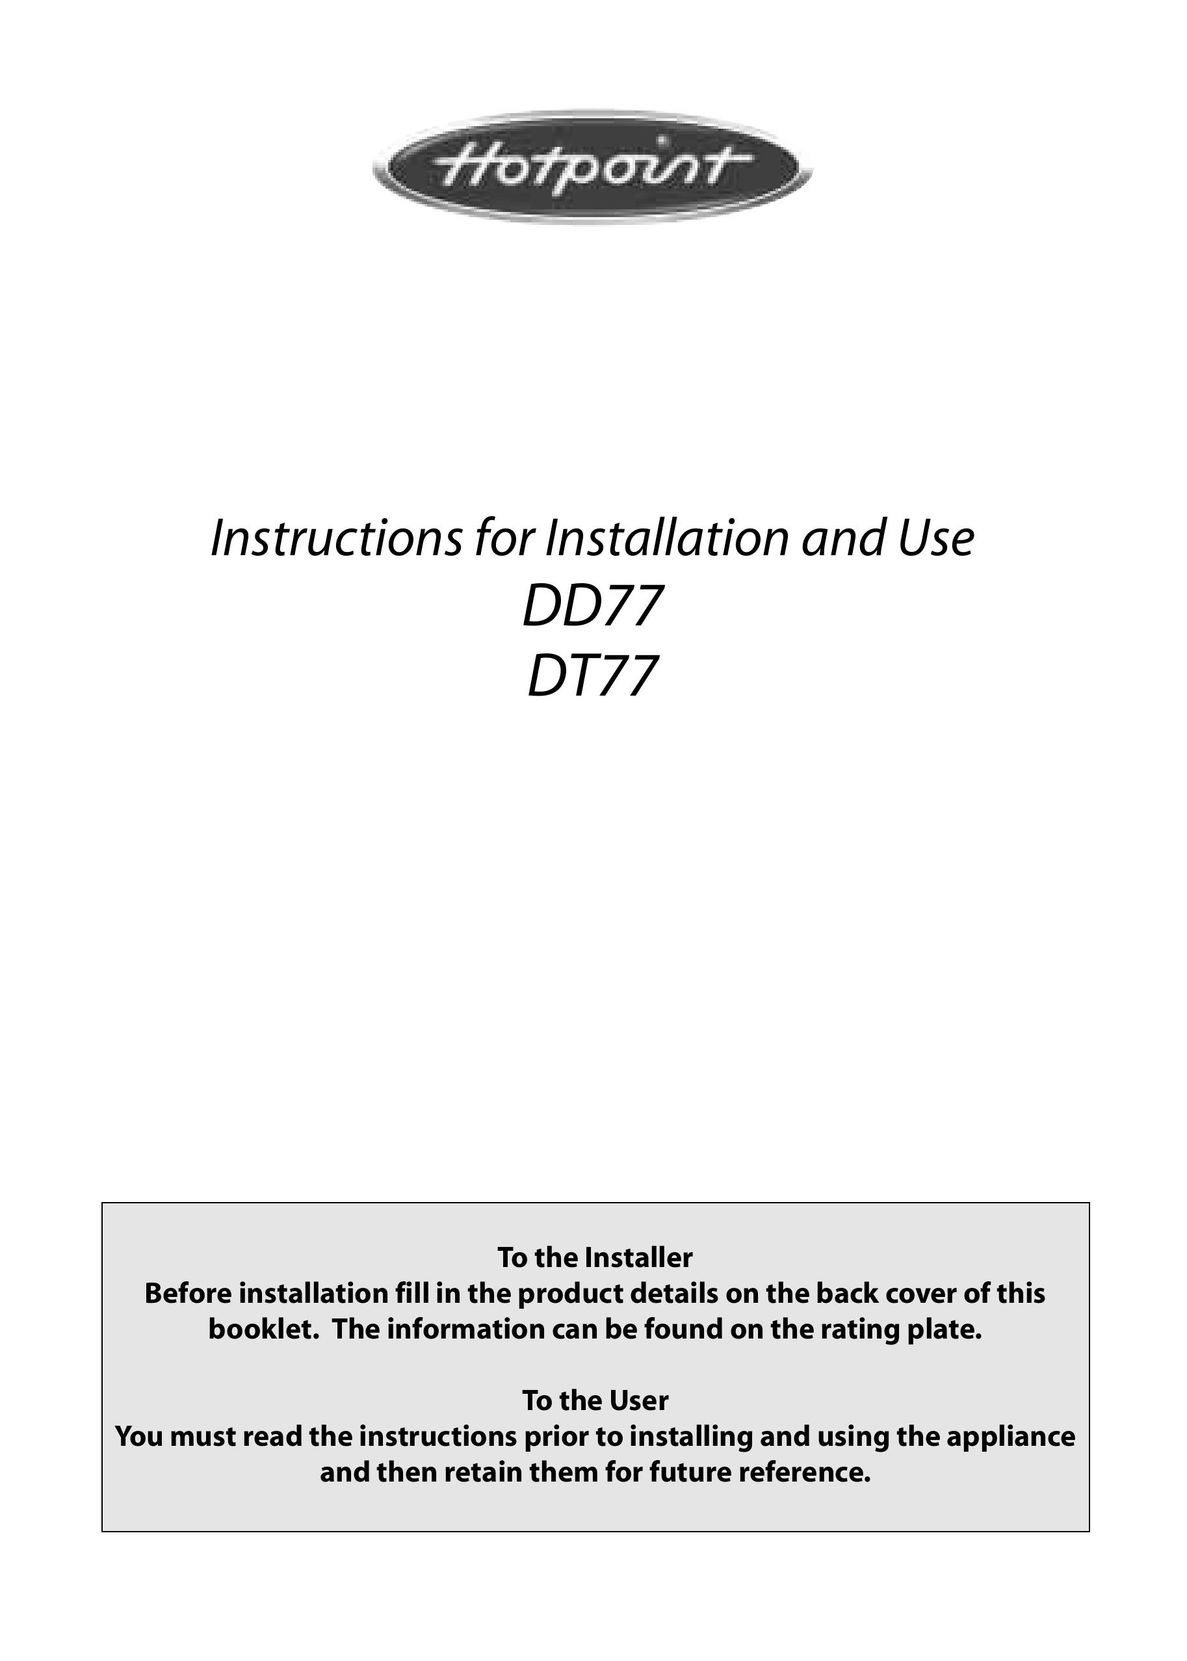 Hotpoint DD77 DT77 Oven User Manual